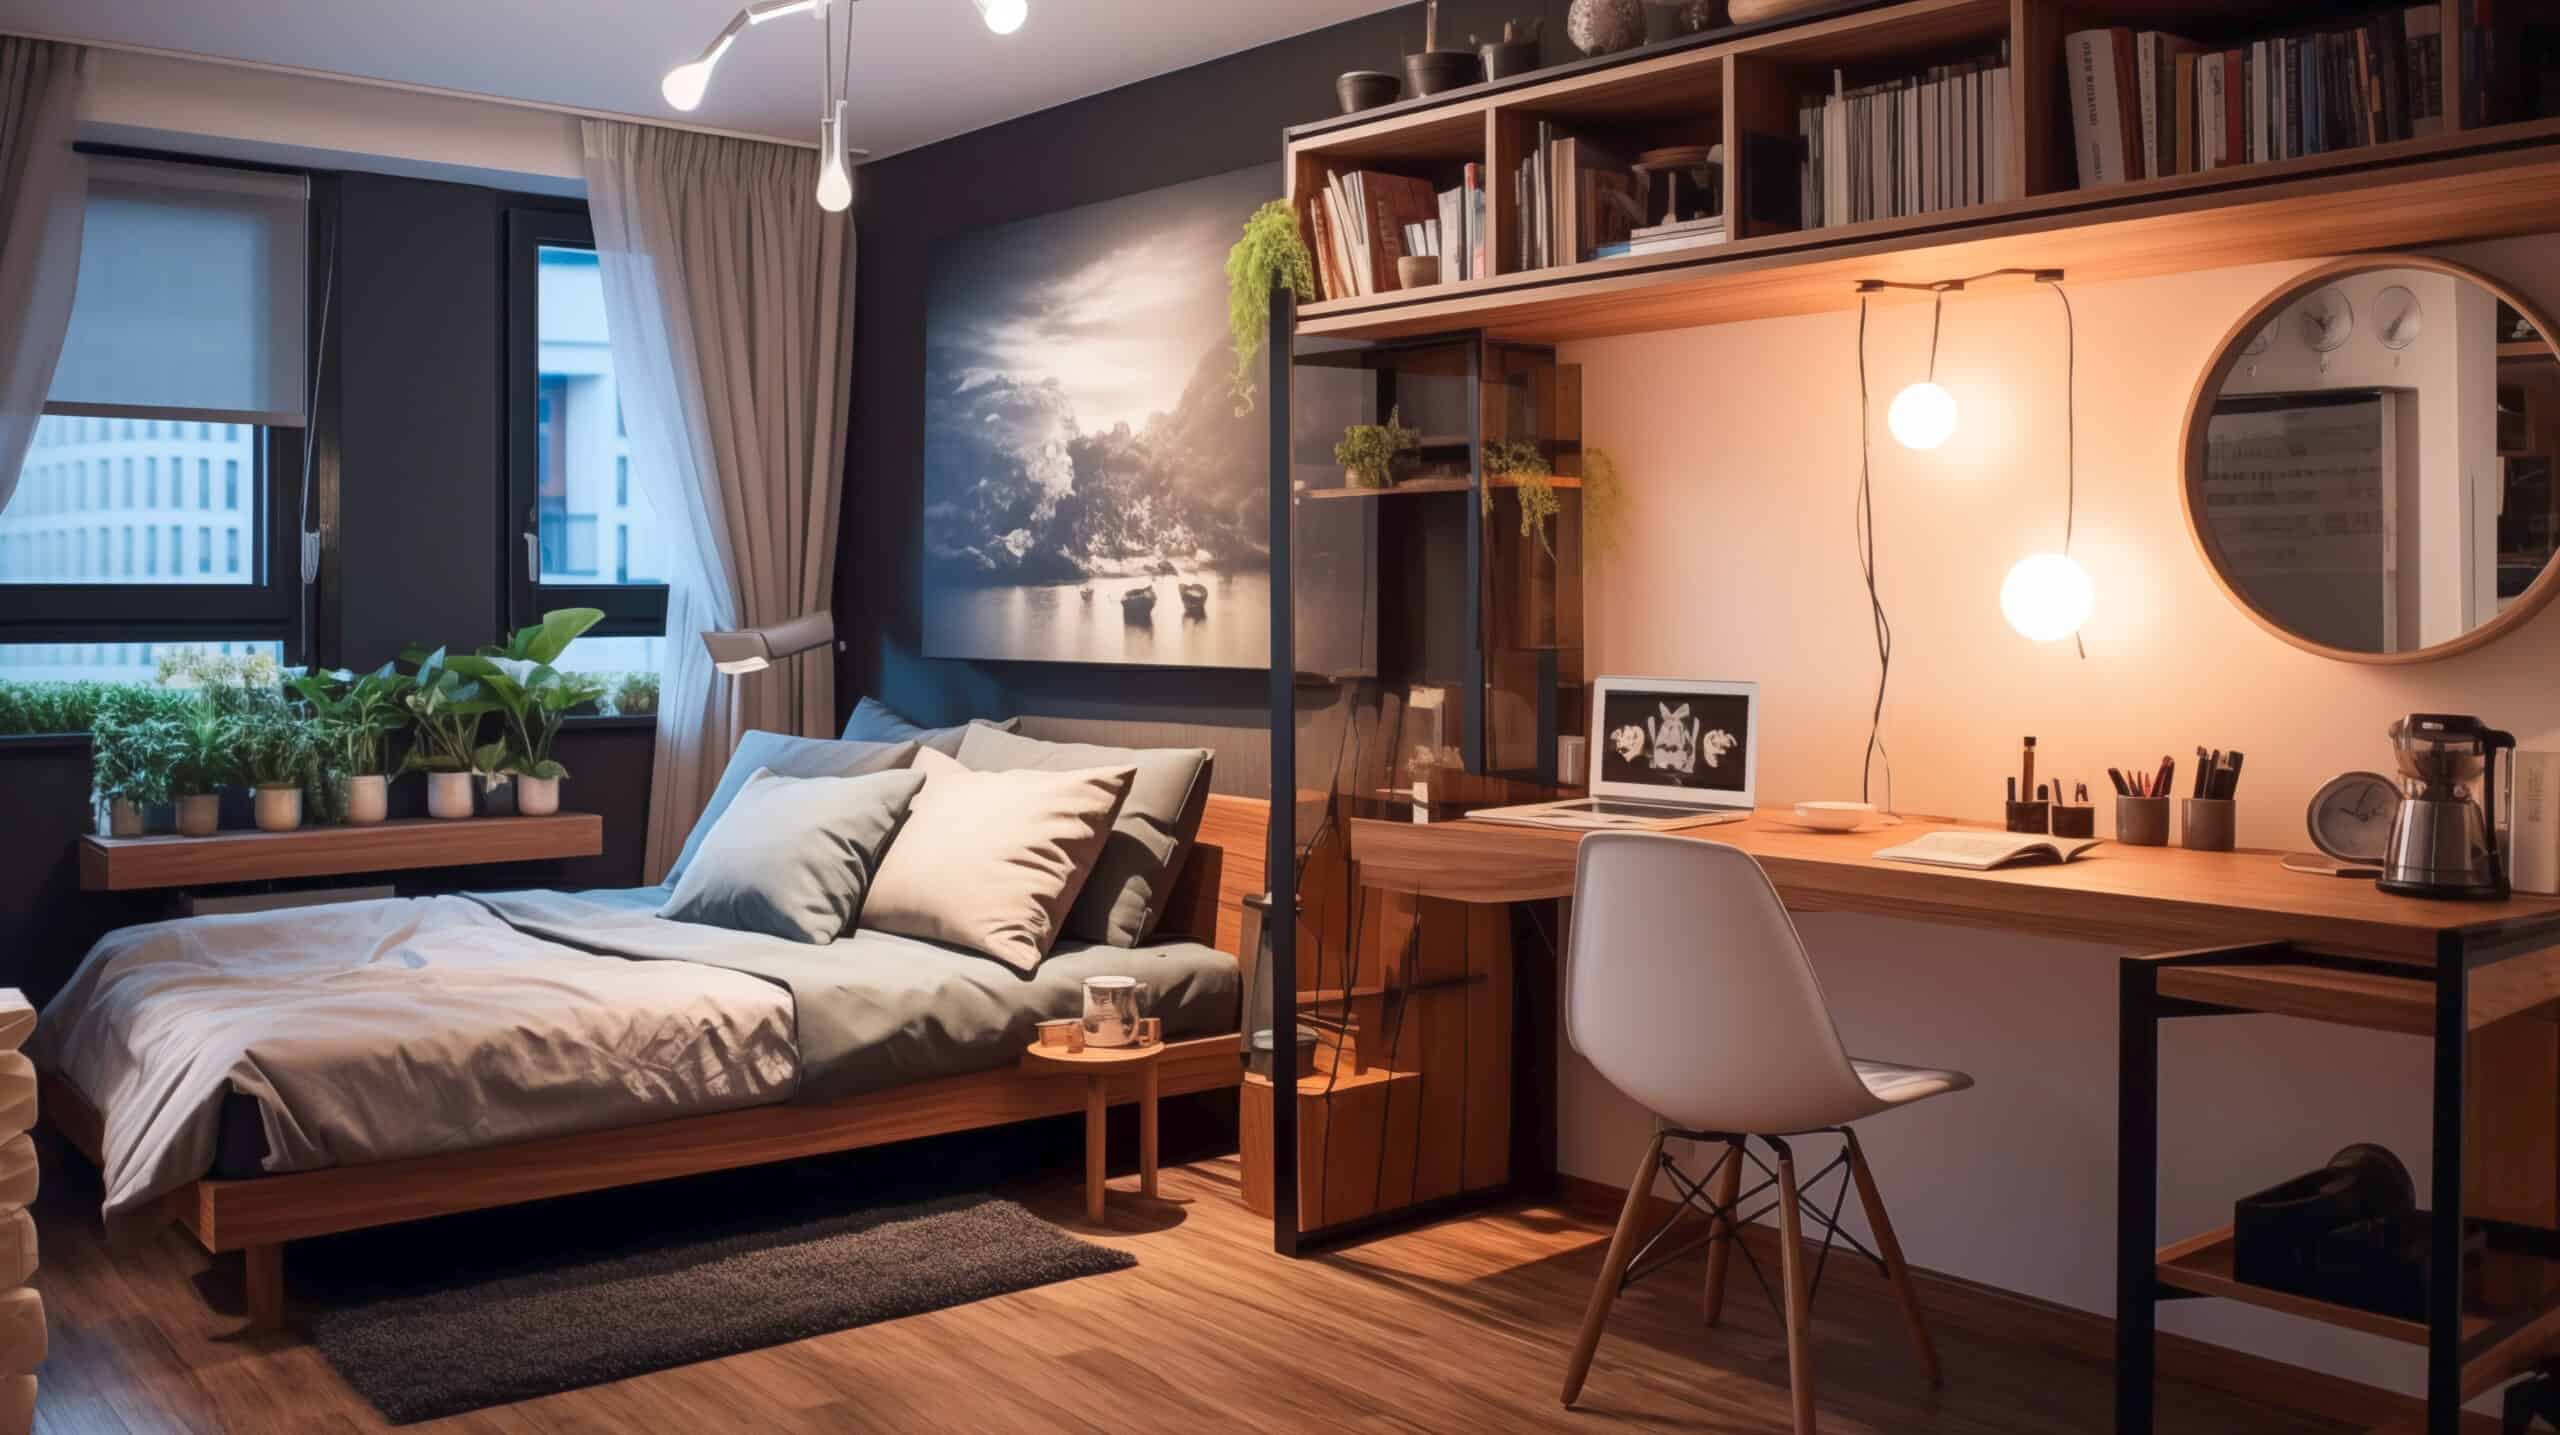 10 Design Ideas For Your Small Room